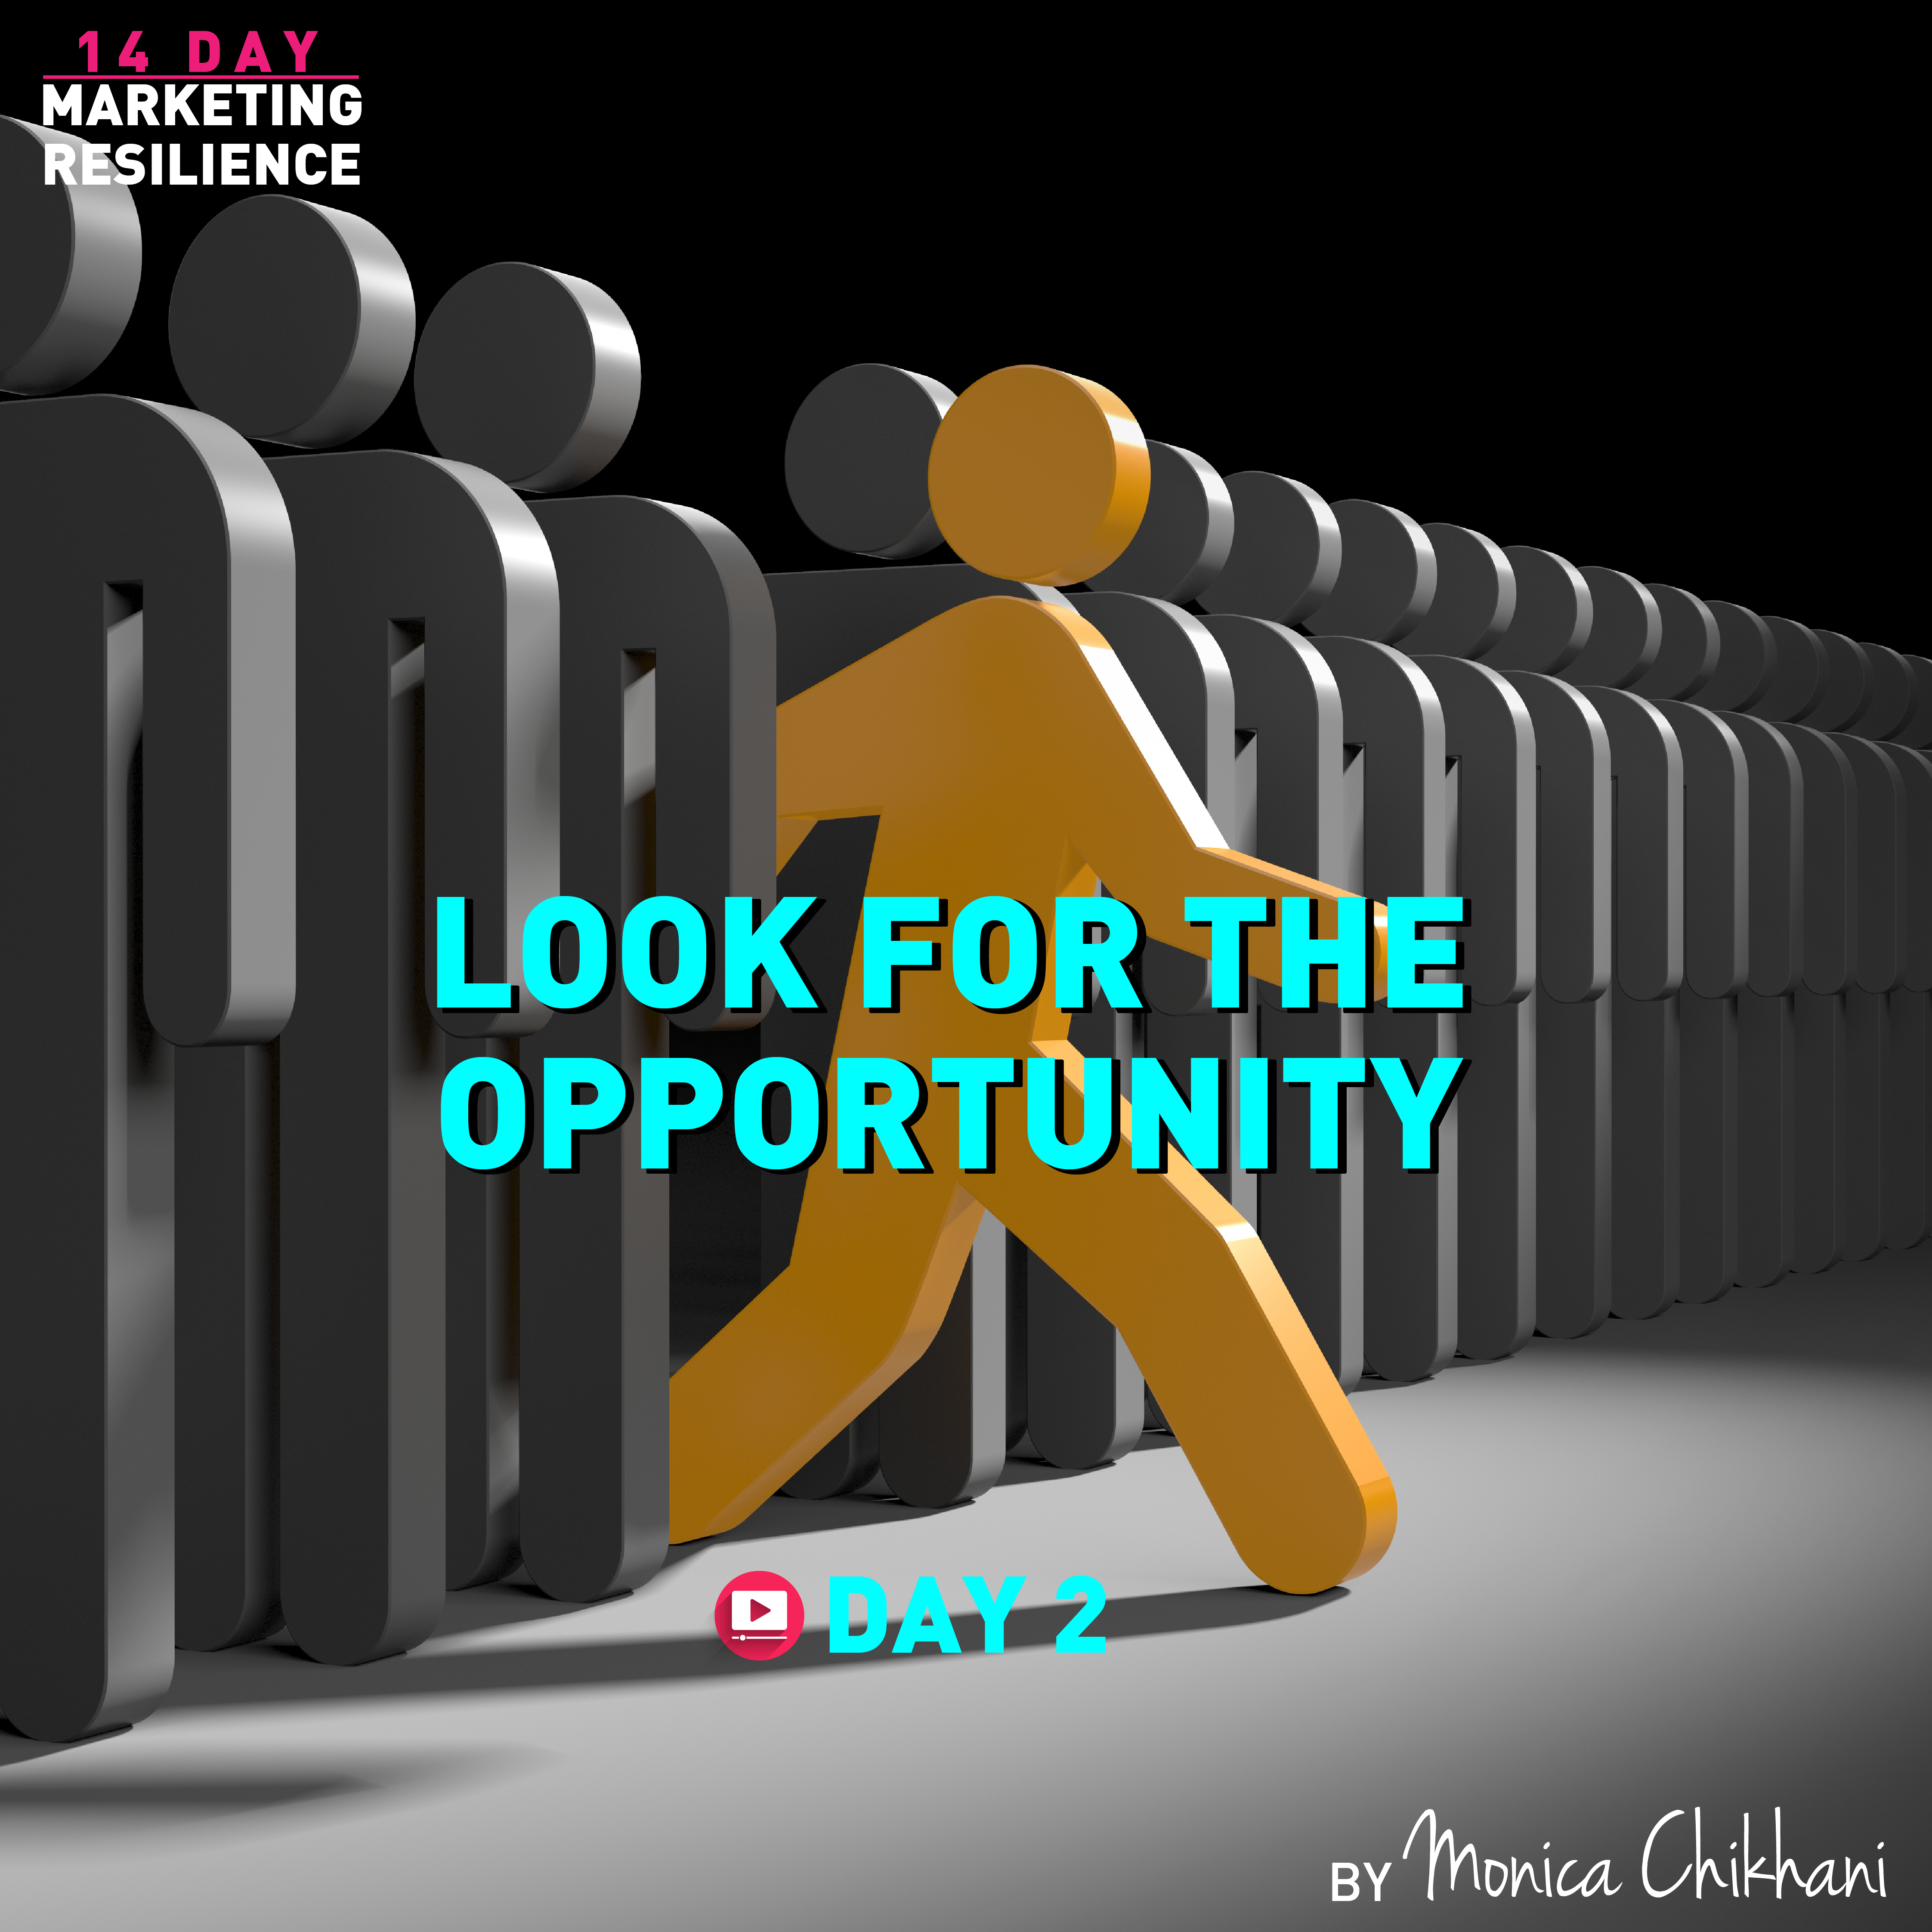 MARKETING RESILIENCE look for the opportunity